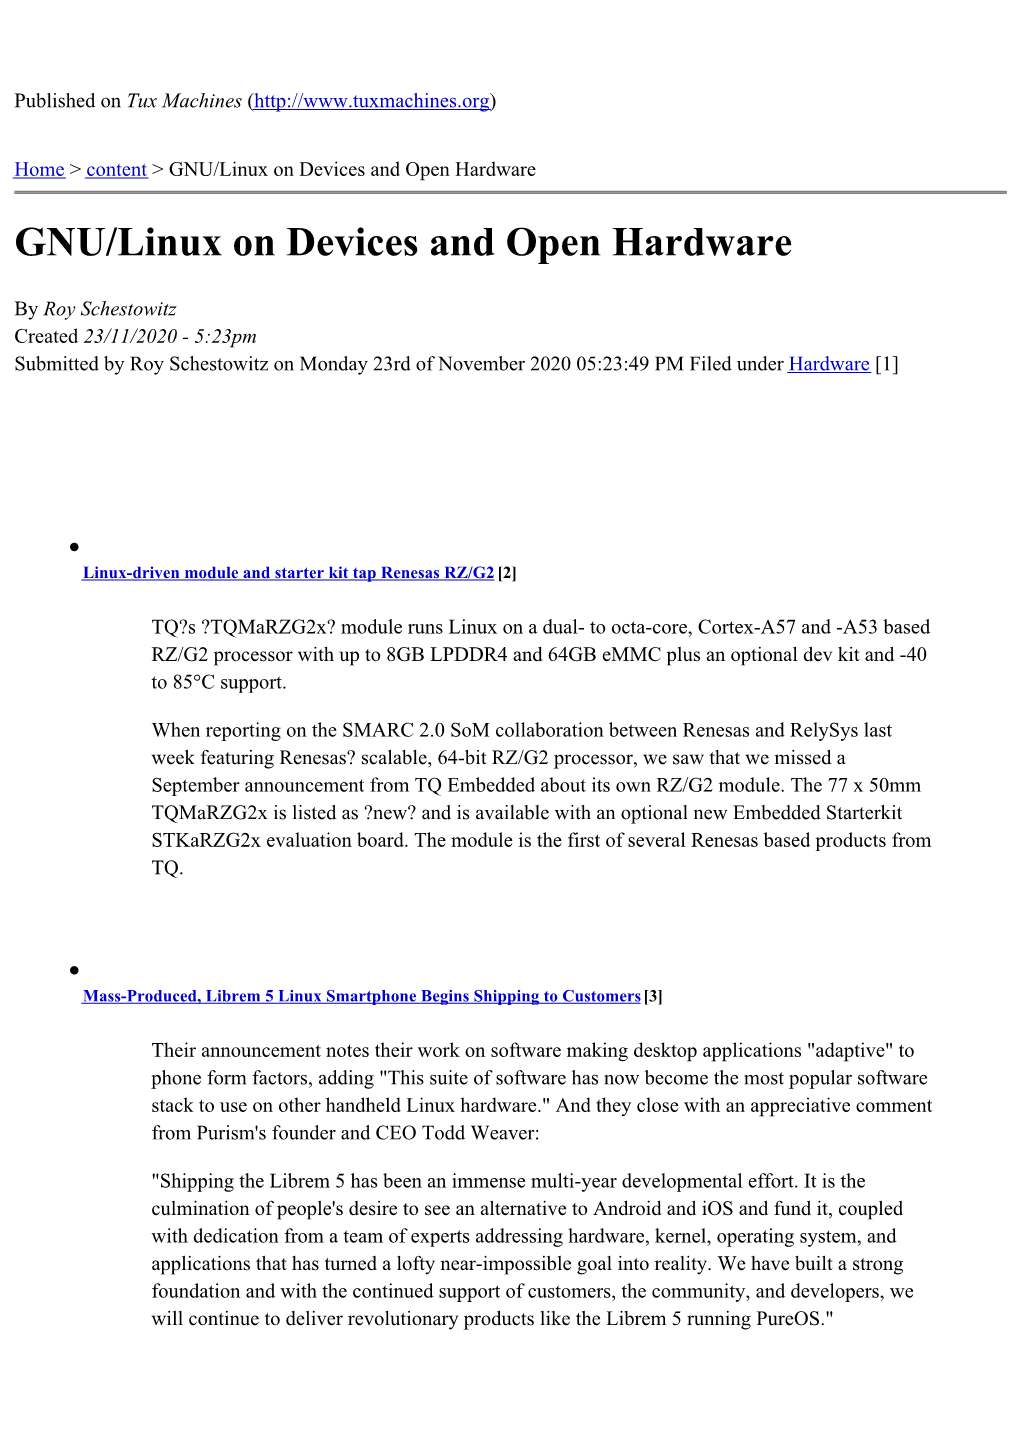 GNU/Linux on Devices and Open Hardware